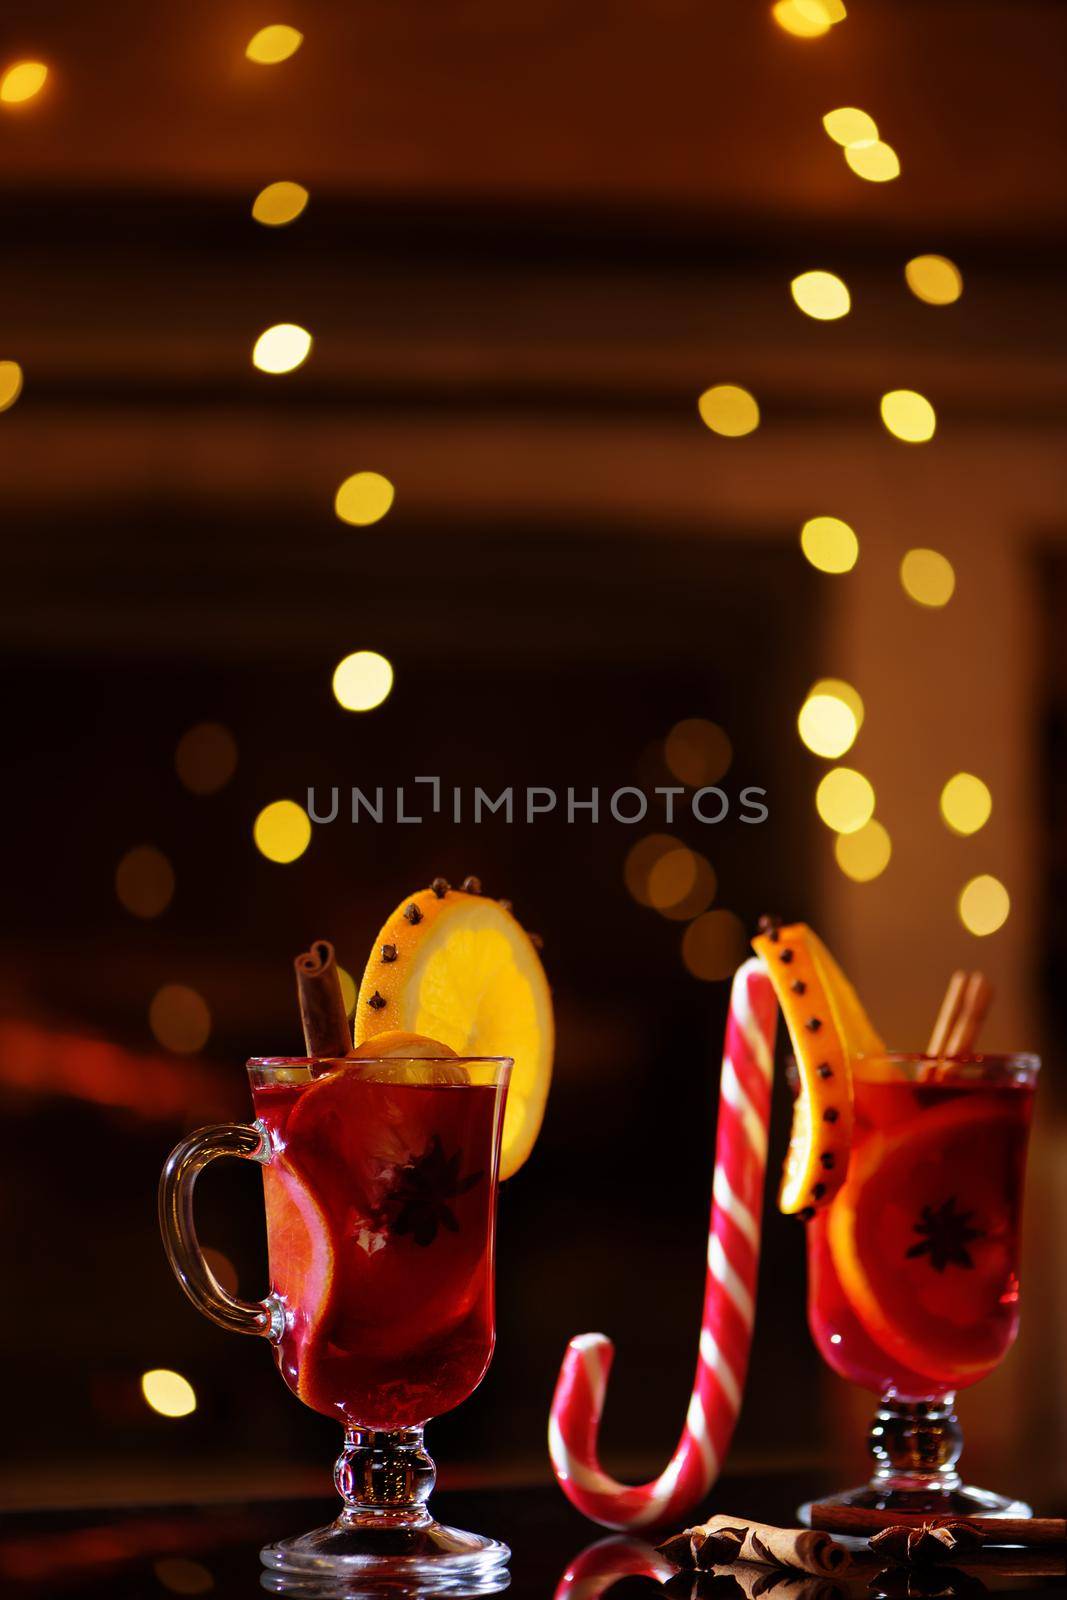 Delicious winter mulled wine with oranges at romantic fireplace with falling stars on background.